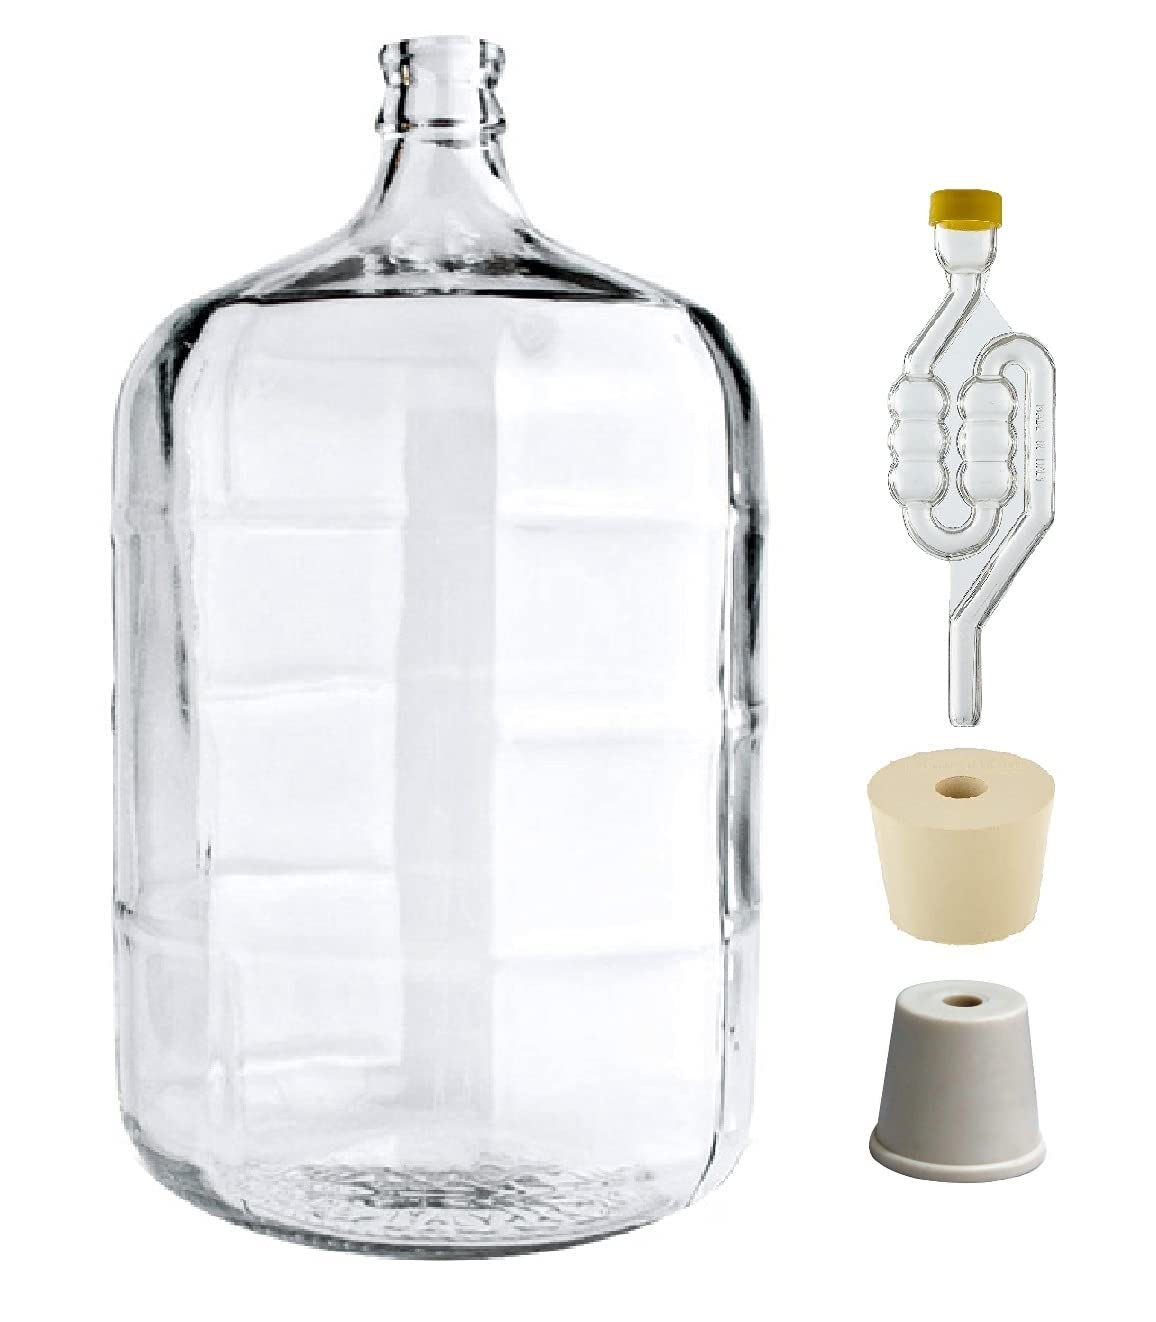 North Mountain Supply 5 Gallon Premium Italian Glass Carboy Fermenting Jug - with Drilled & Undrilled Rubber Stoppers and 6-Bubble Airlock